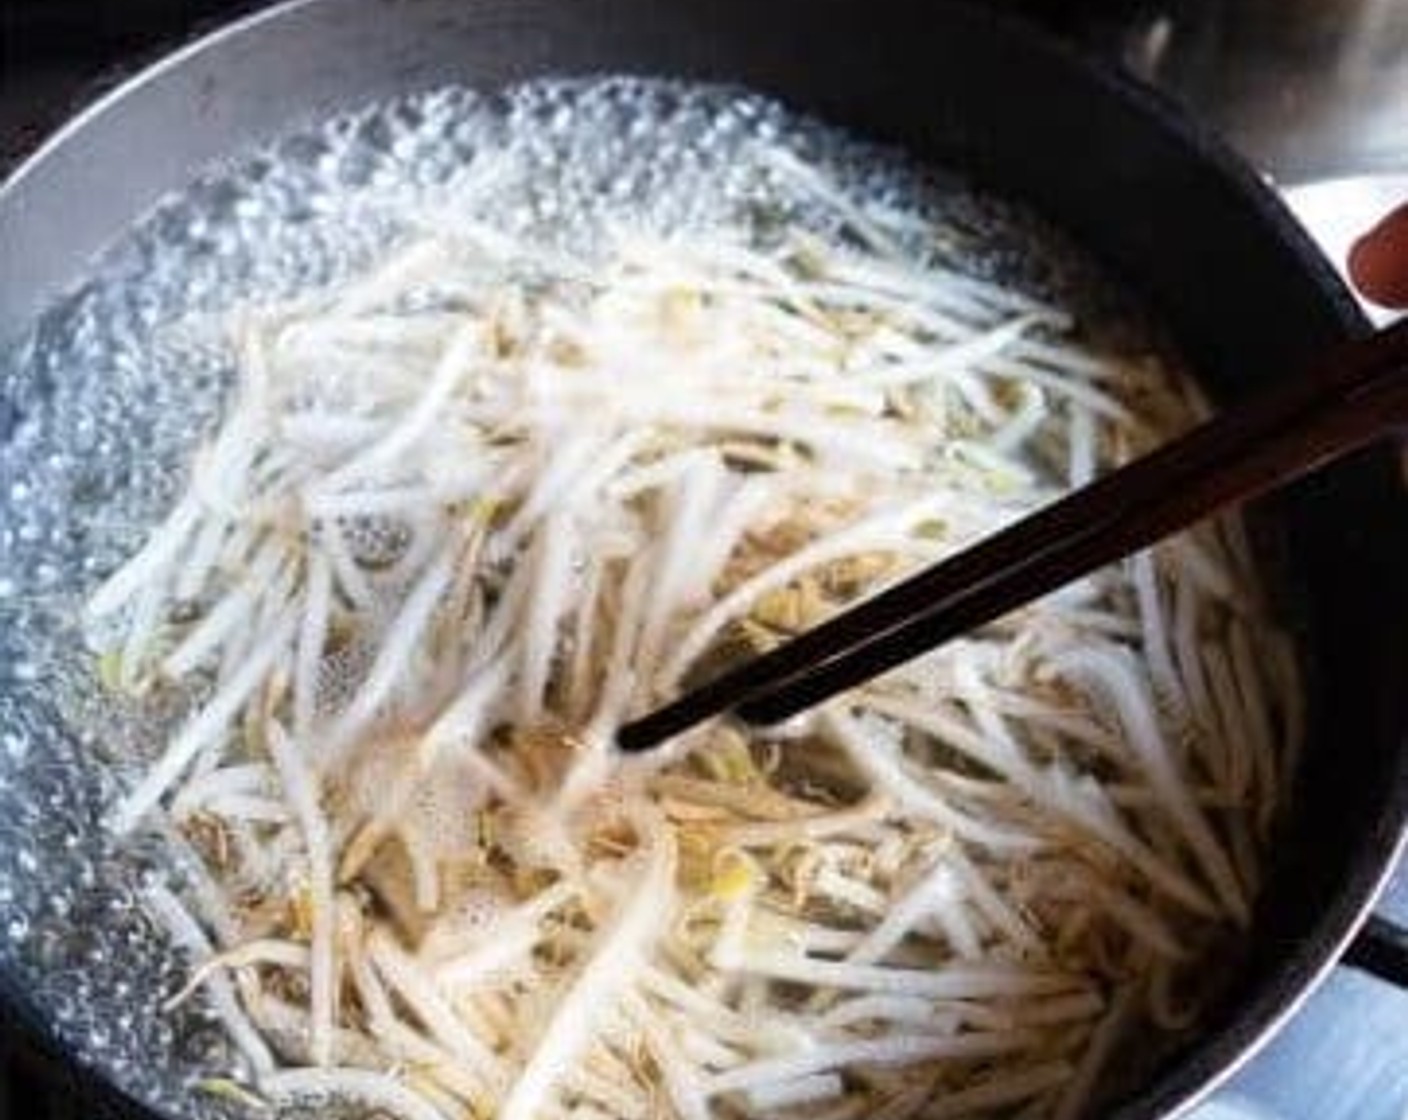 step 2 Wash the Bean Sprouts (1 1/4 cups), add them to a pan, cover with water. Boil them on high heat for 1-2 minutes. You only want them lightly cooked with a bit of crunch still.